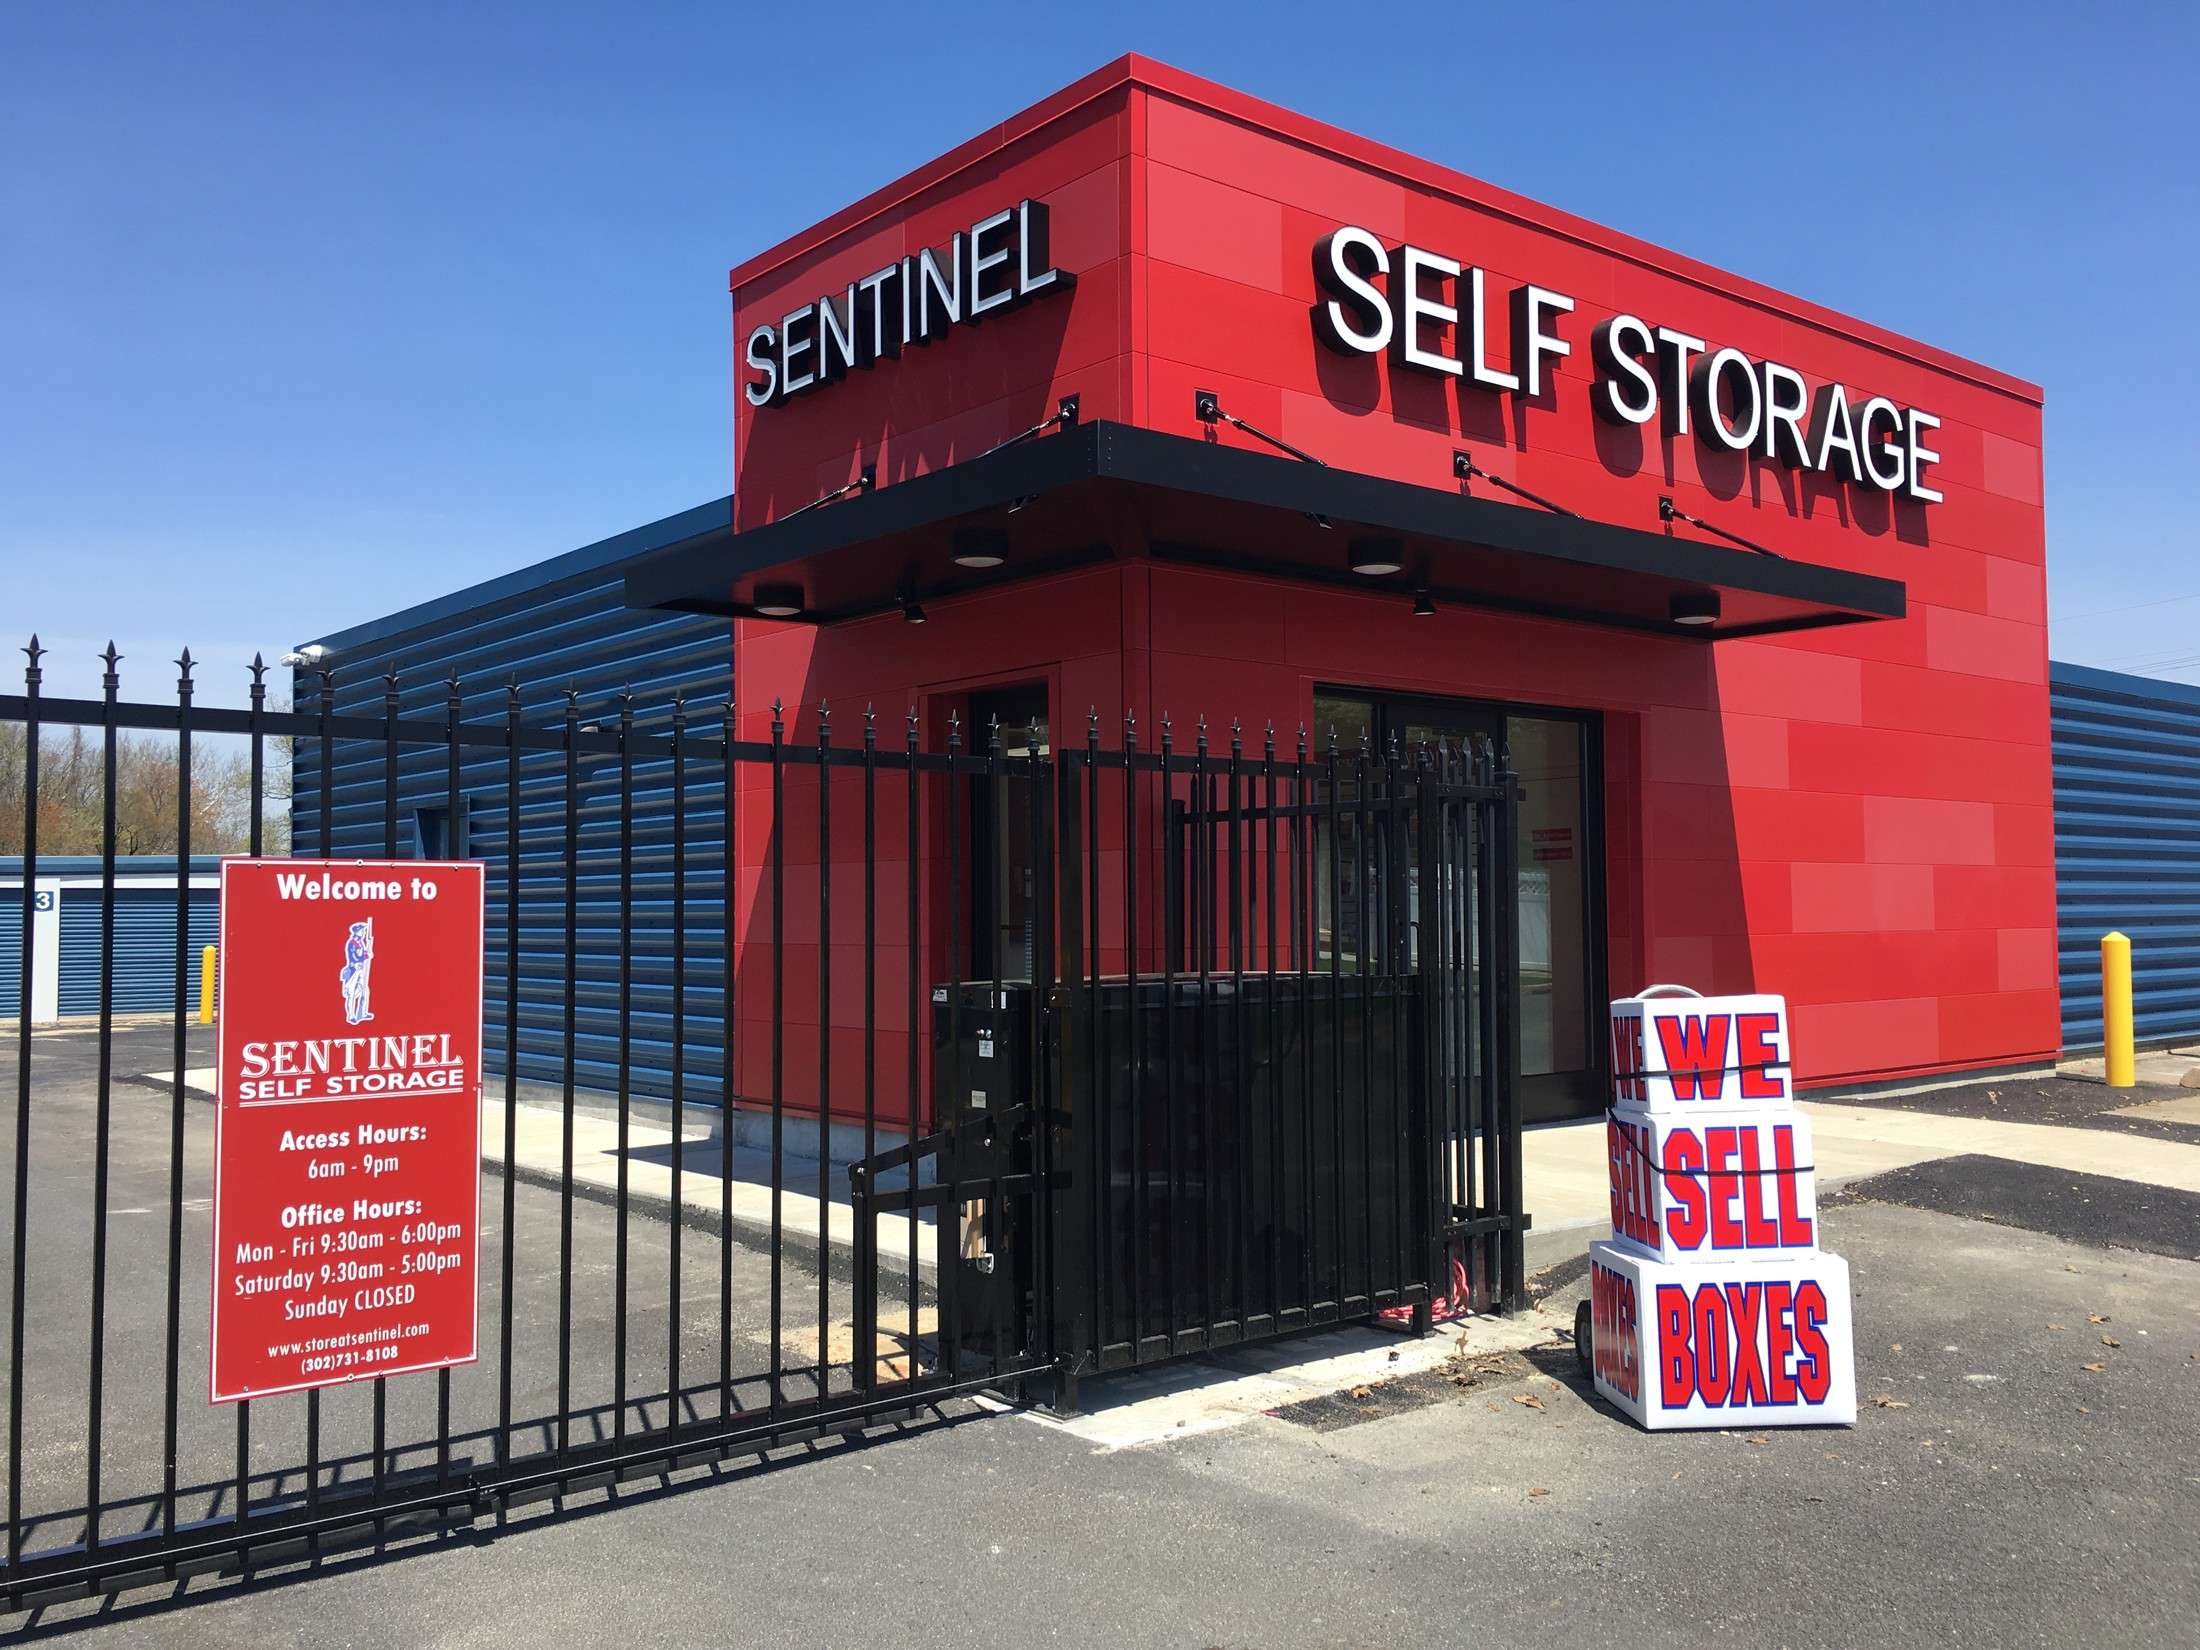 Secure Self Storage - 4 Things To Know About It